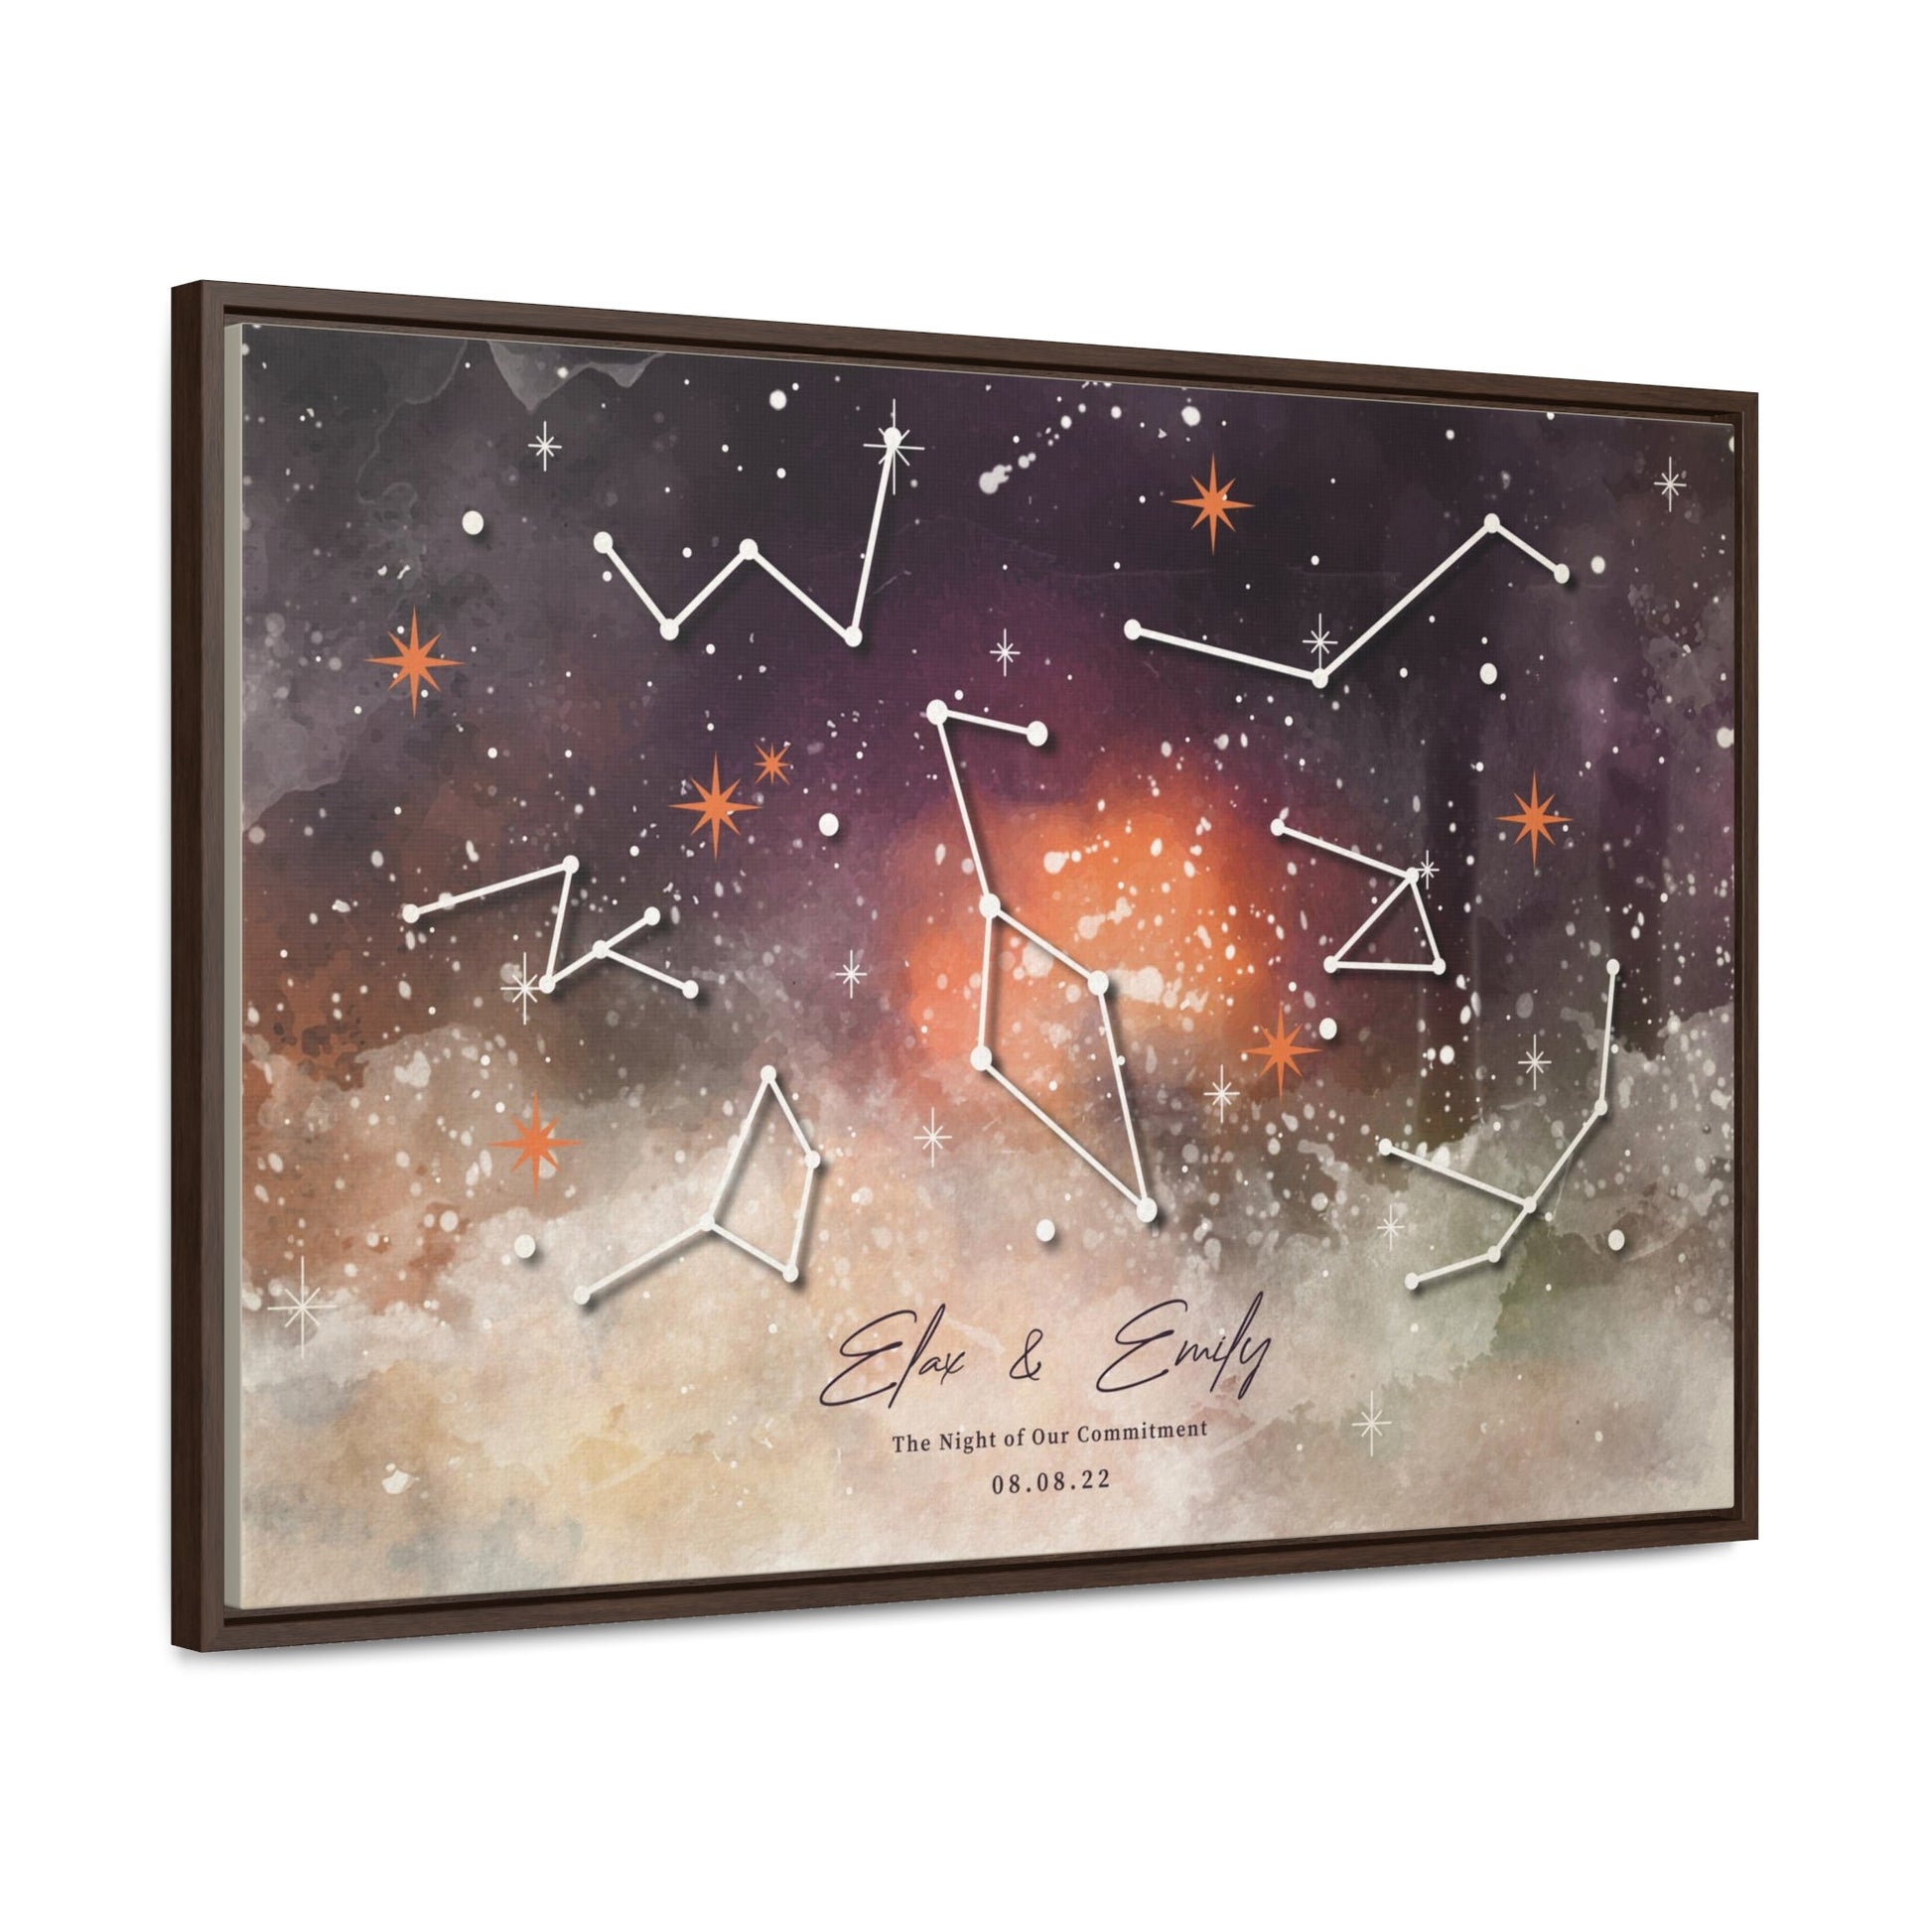 Custom star map depicting night sky with personalized constellations.